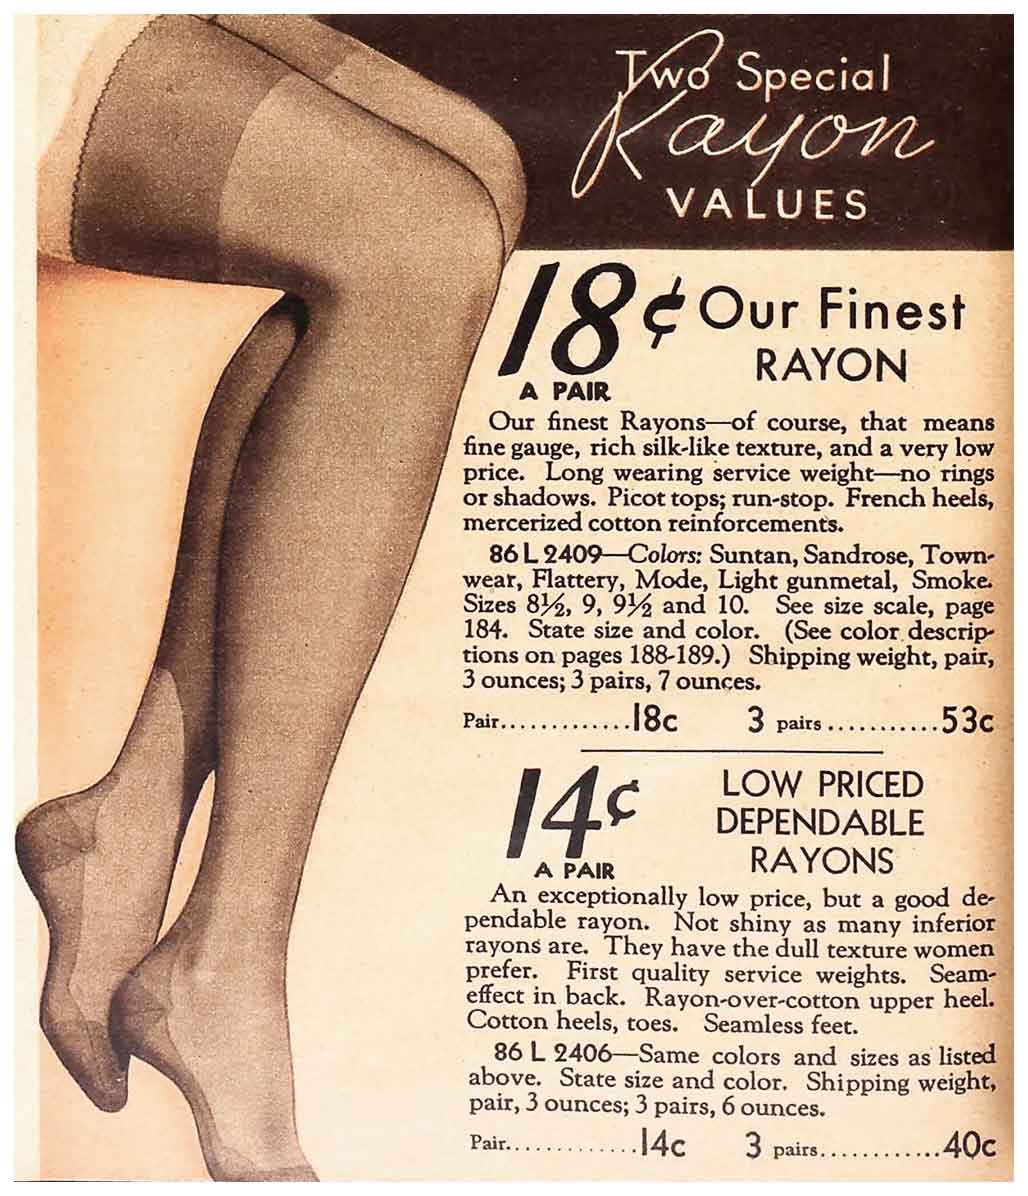 1930s-Fashion---Stocking-styles-from-Sears-2